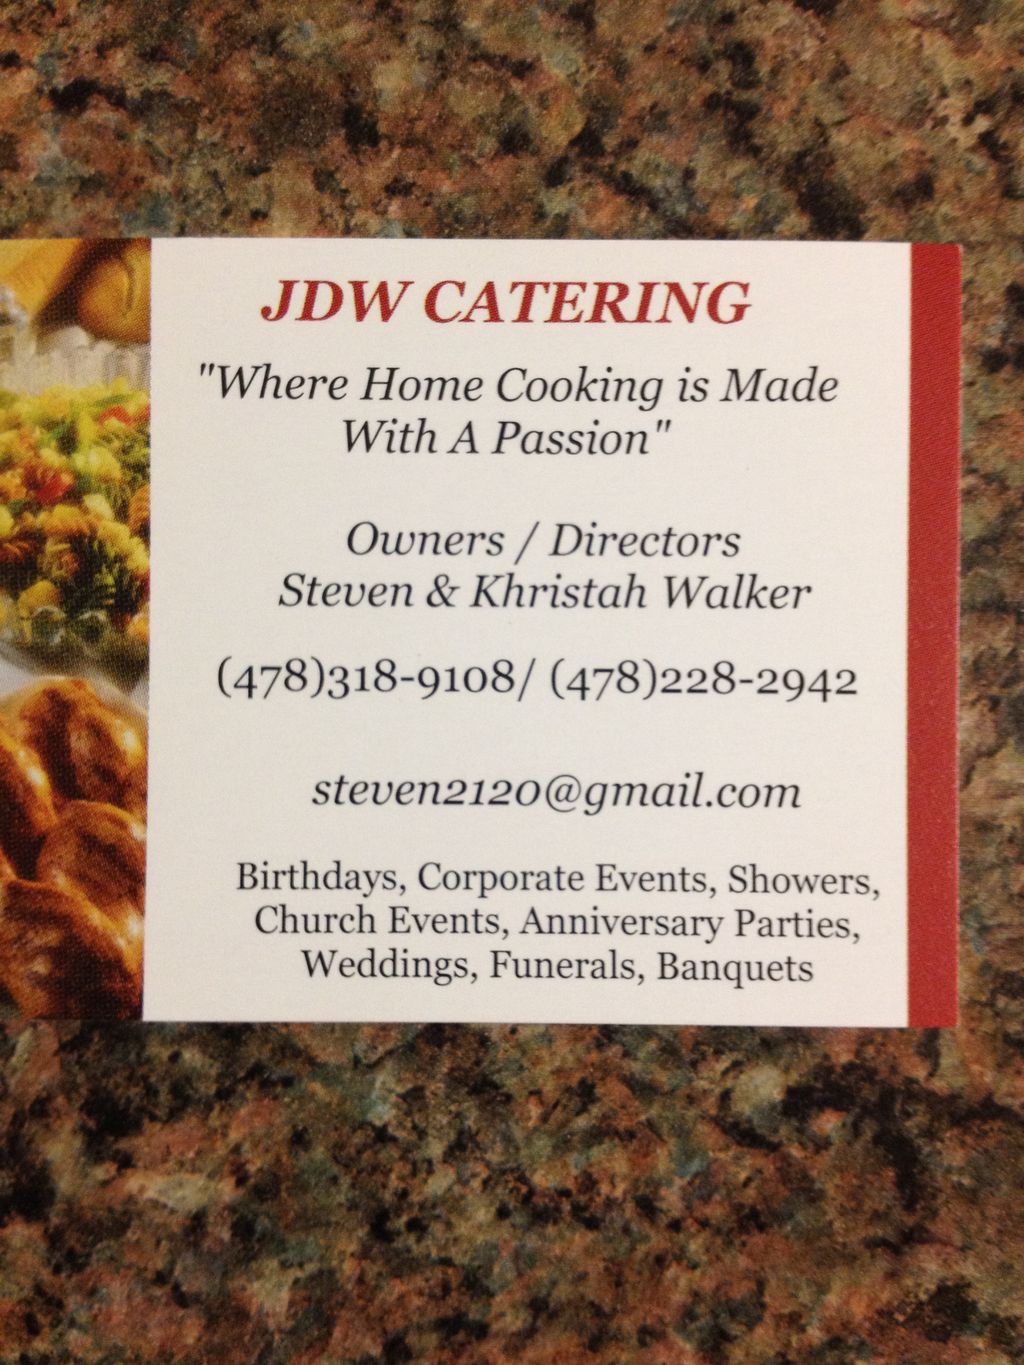 JDW Catering Services